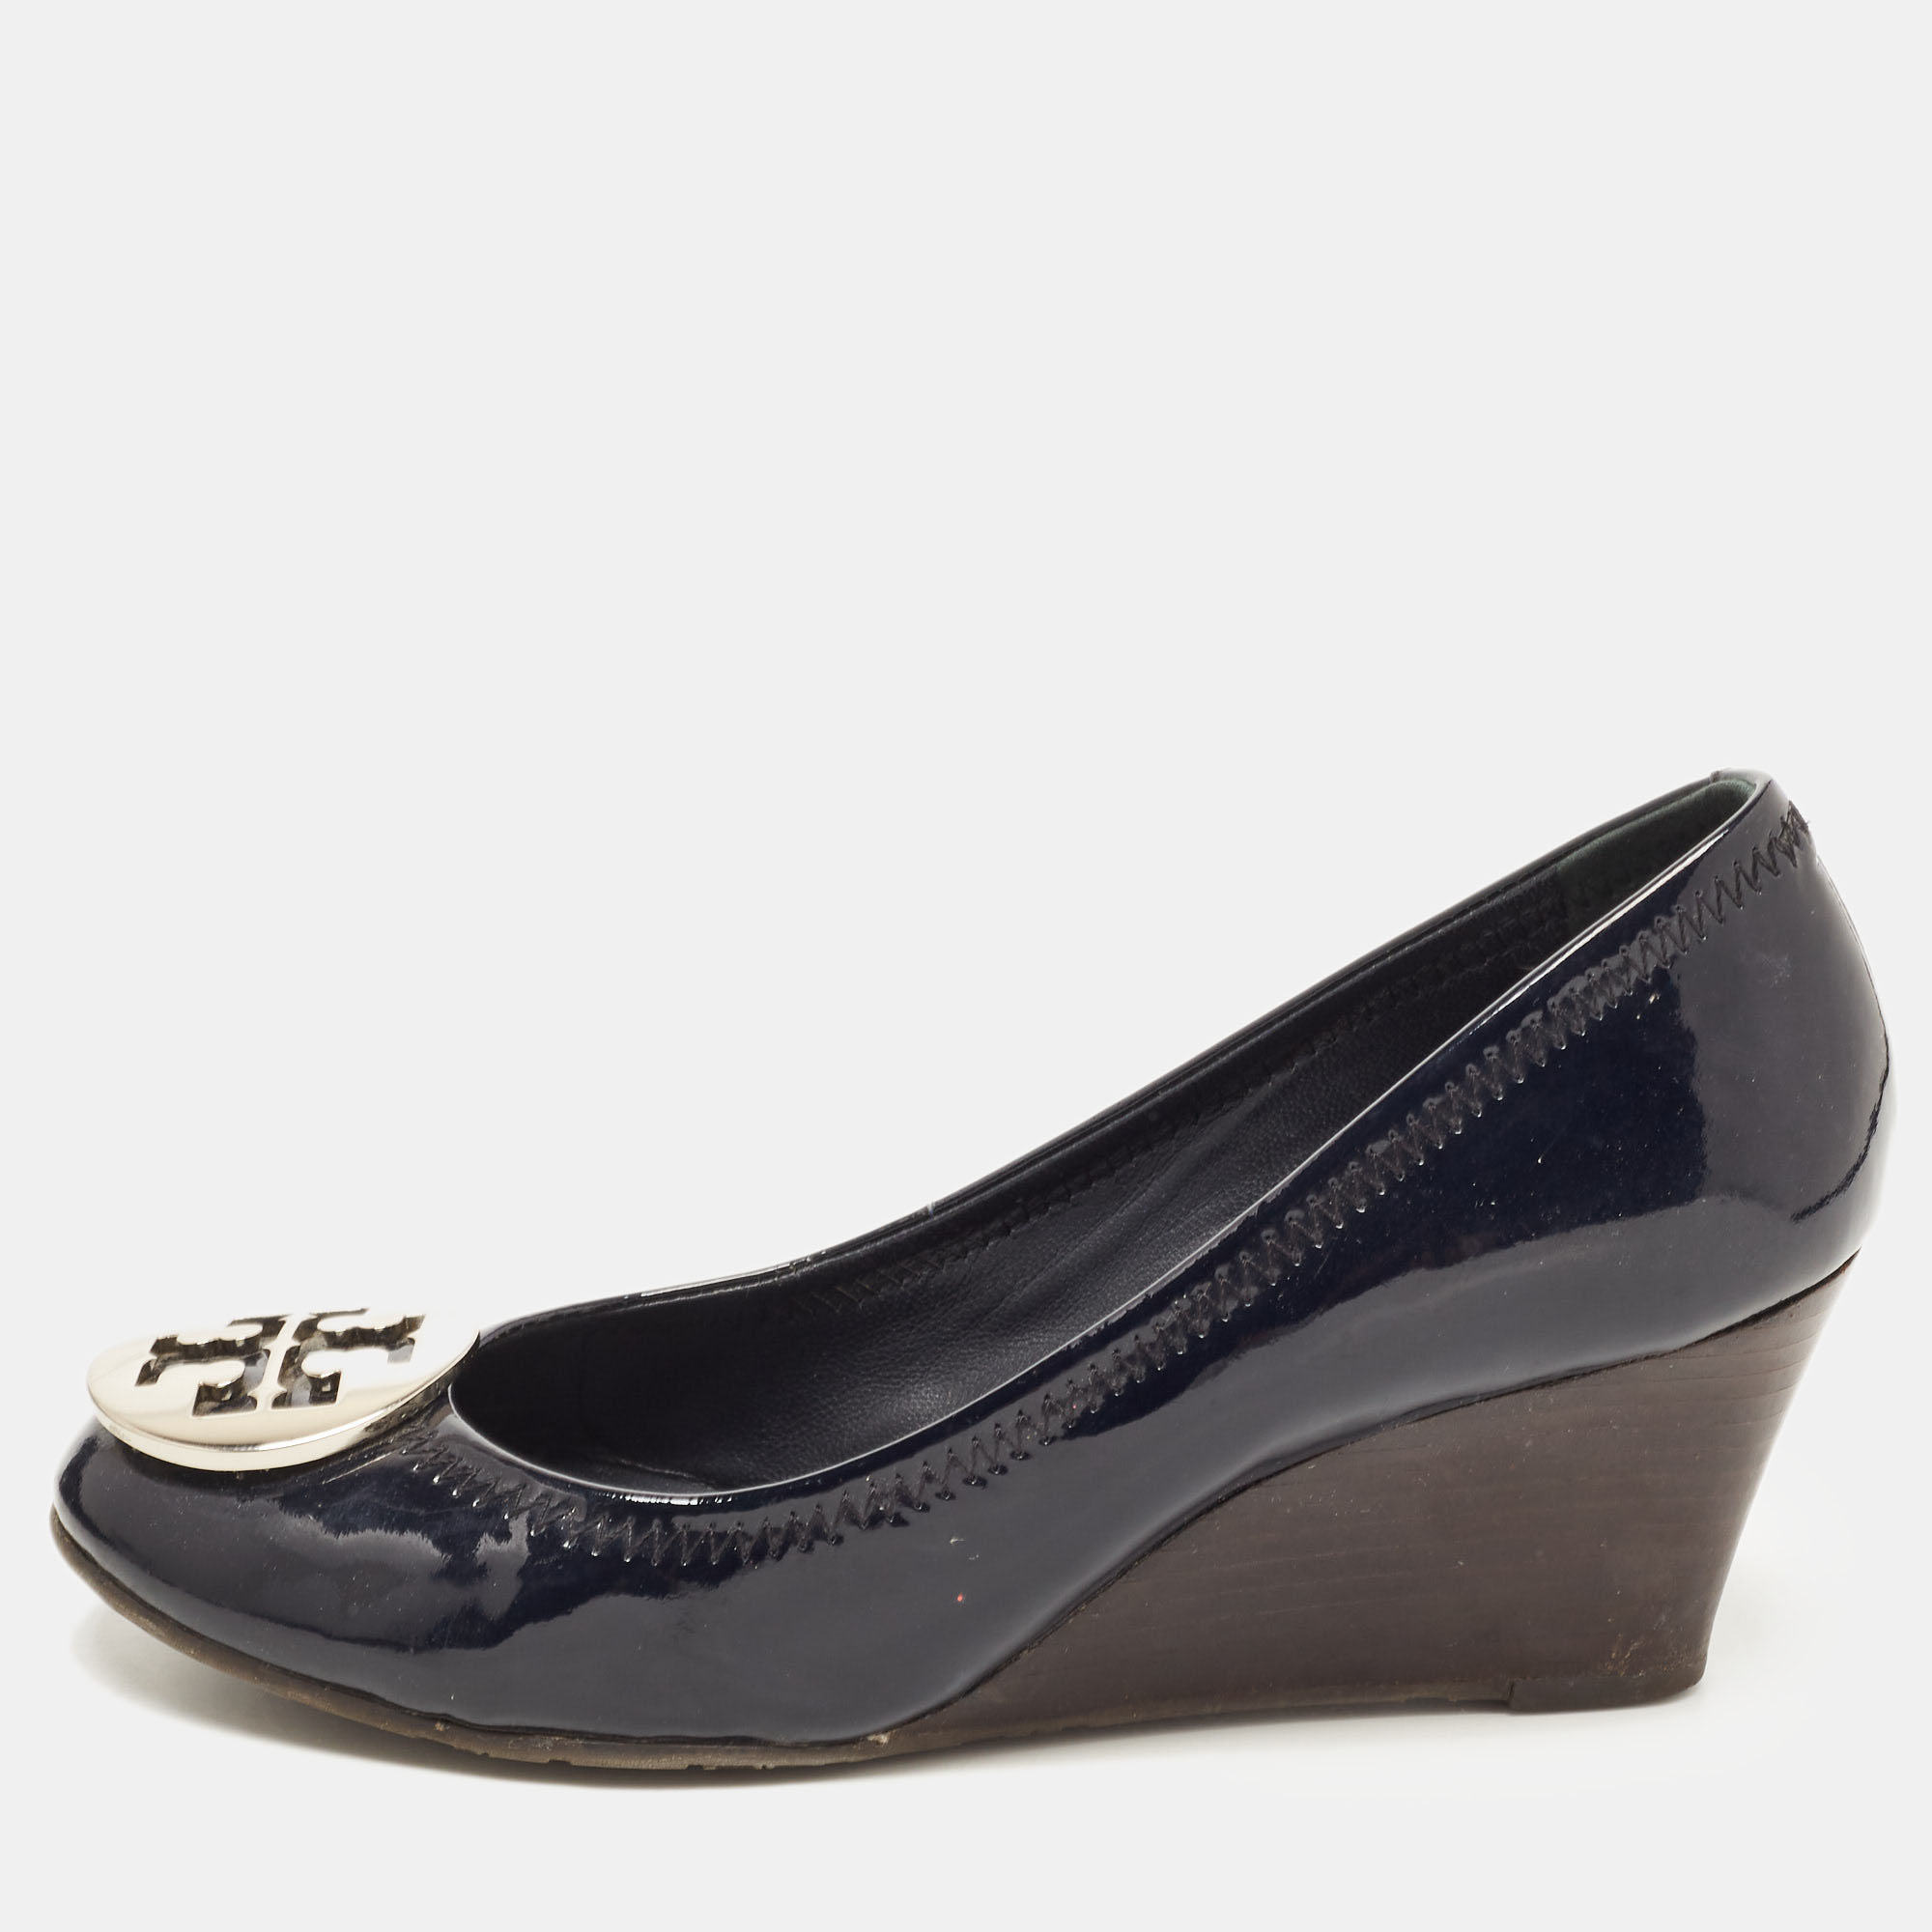 Tory Burch Navy Blue Patent Leather Wedge Pumps Size 36.5